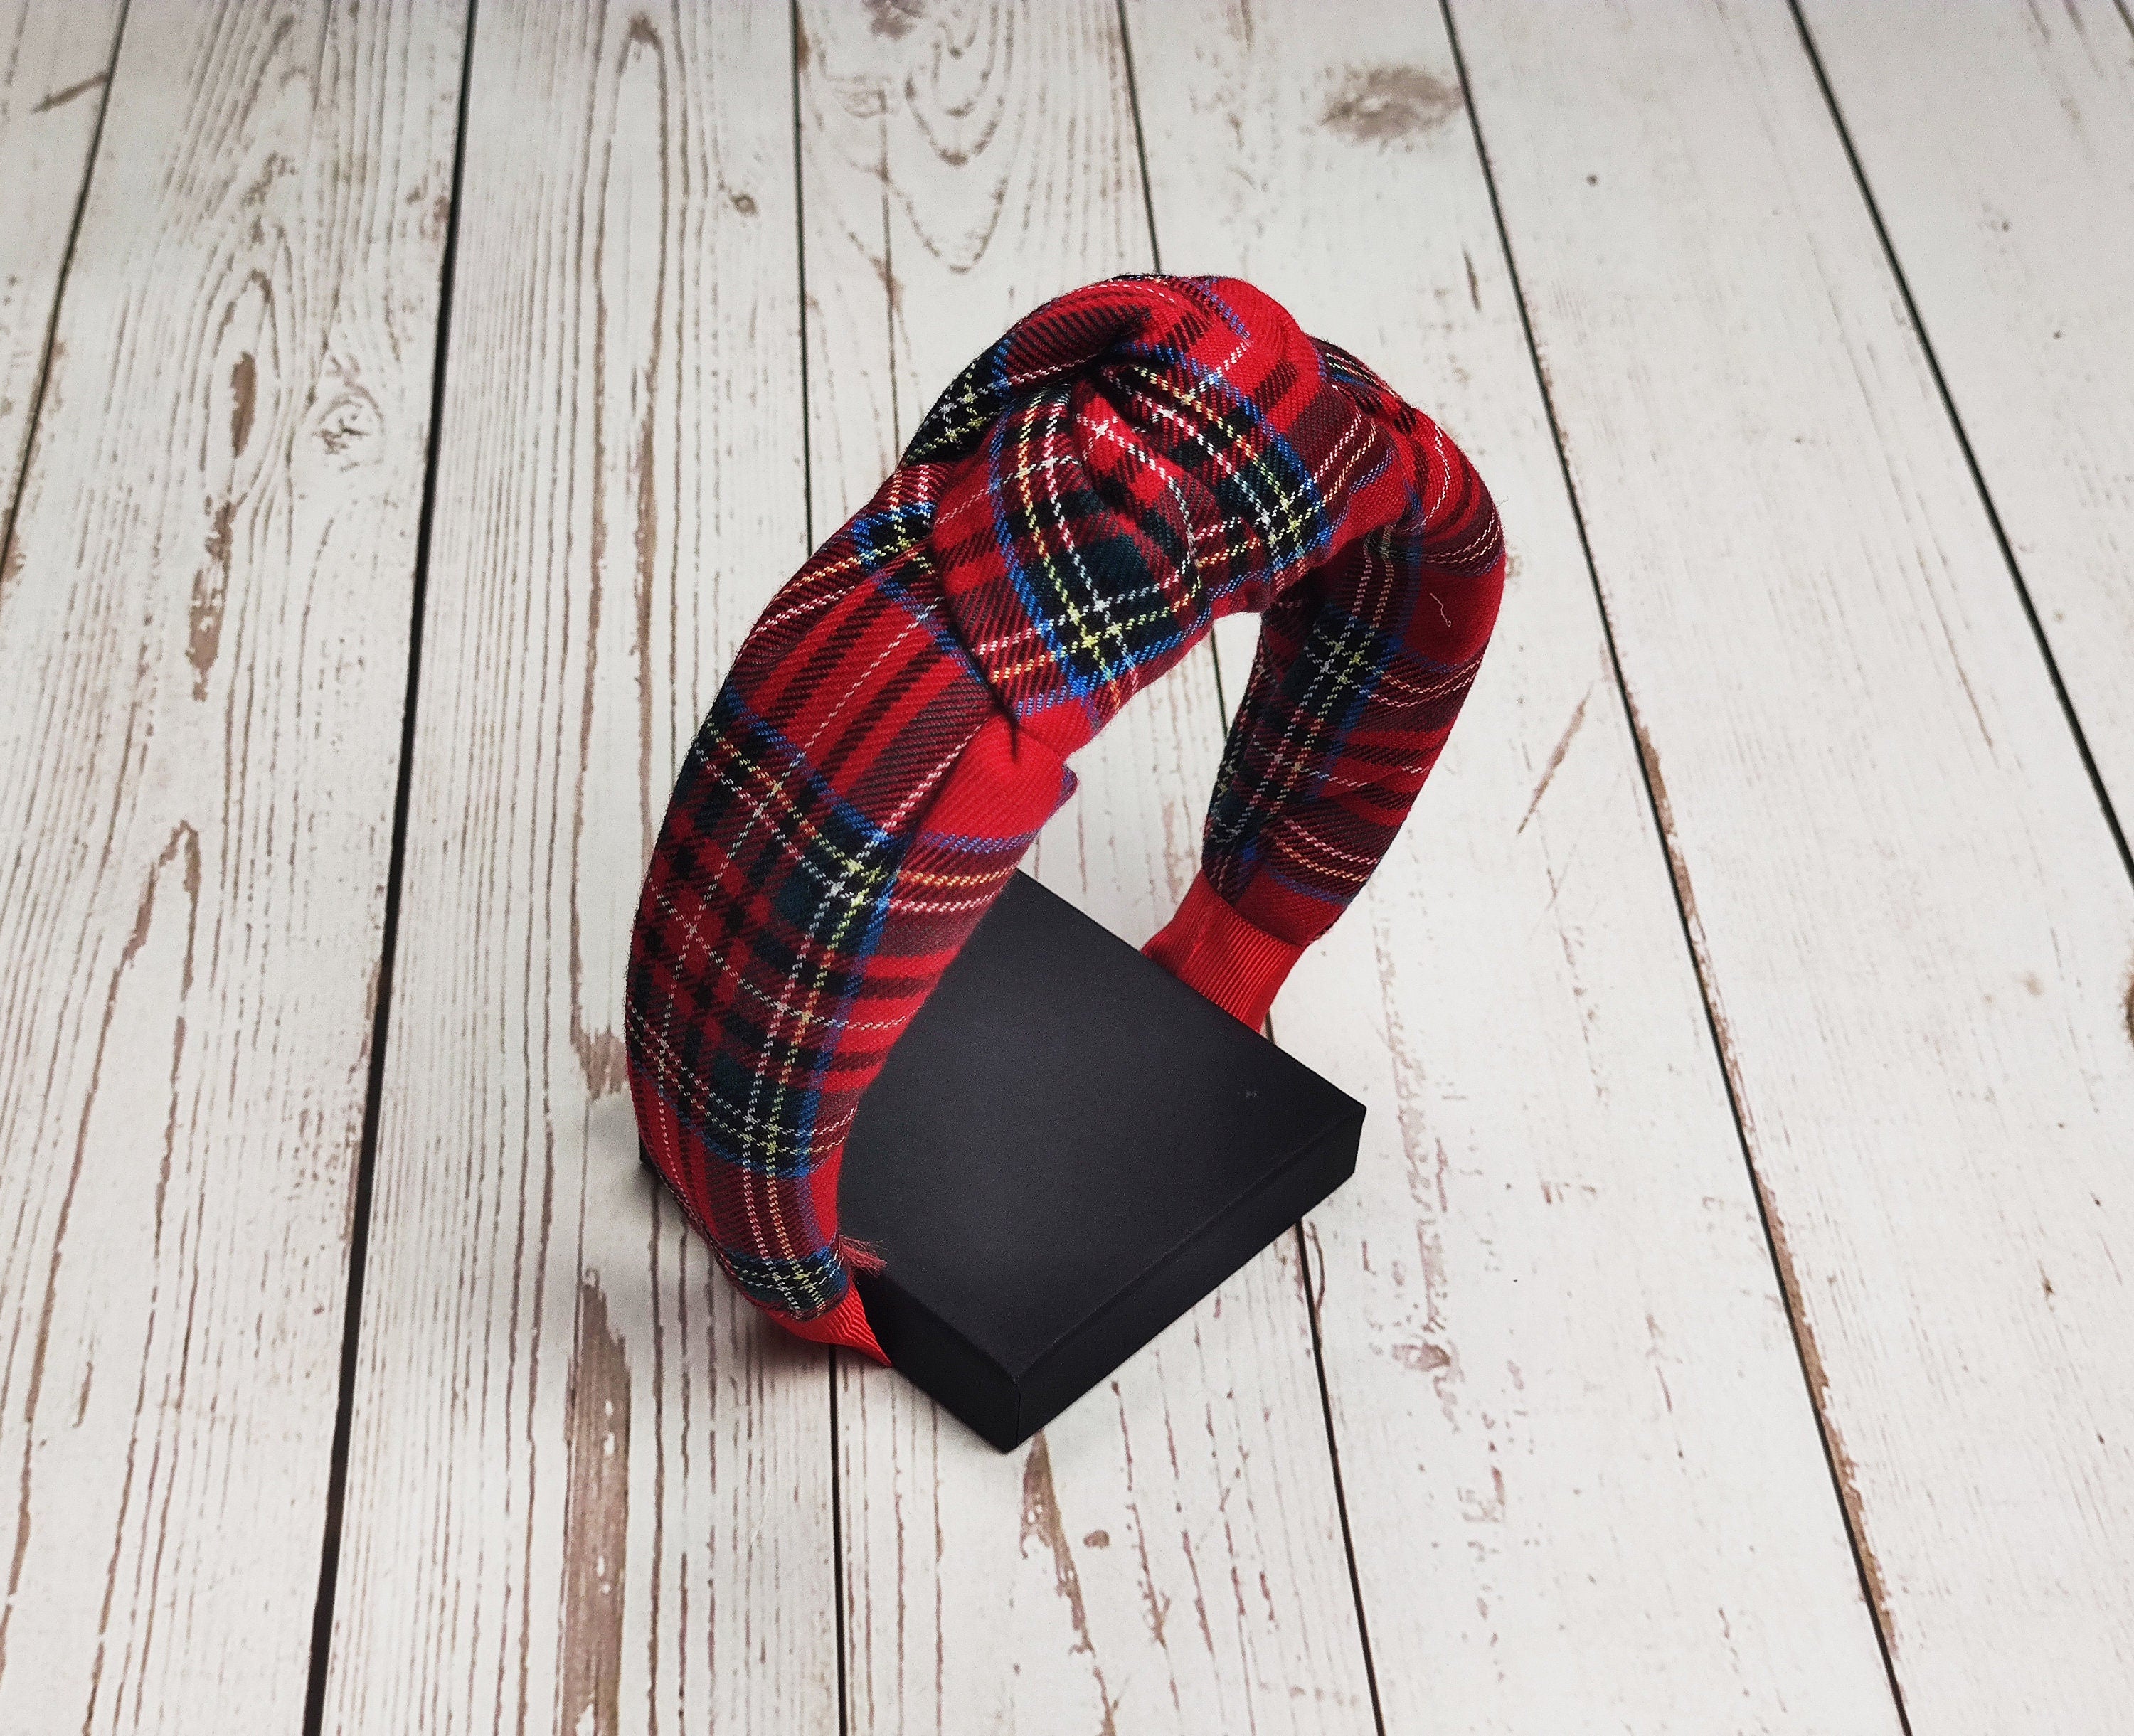 Get ready for the colder months with our selection of headbands for women. FromAlice bands that tie in a knot at the back of your head, to wide headbands that will cover your whole head, we have got you covered!